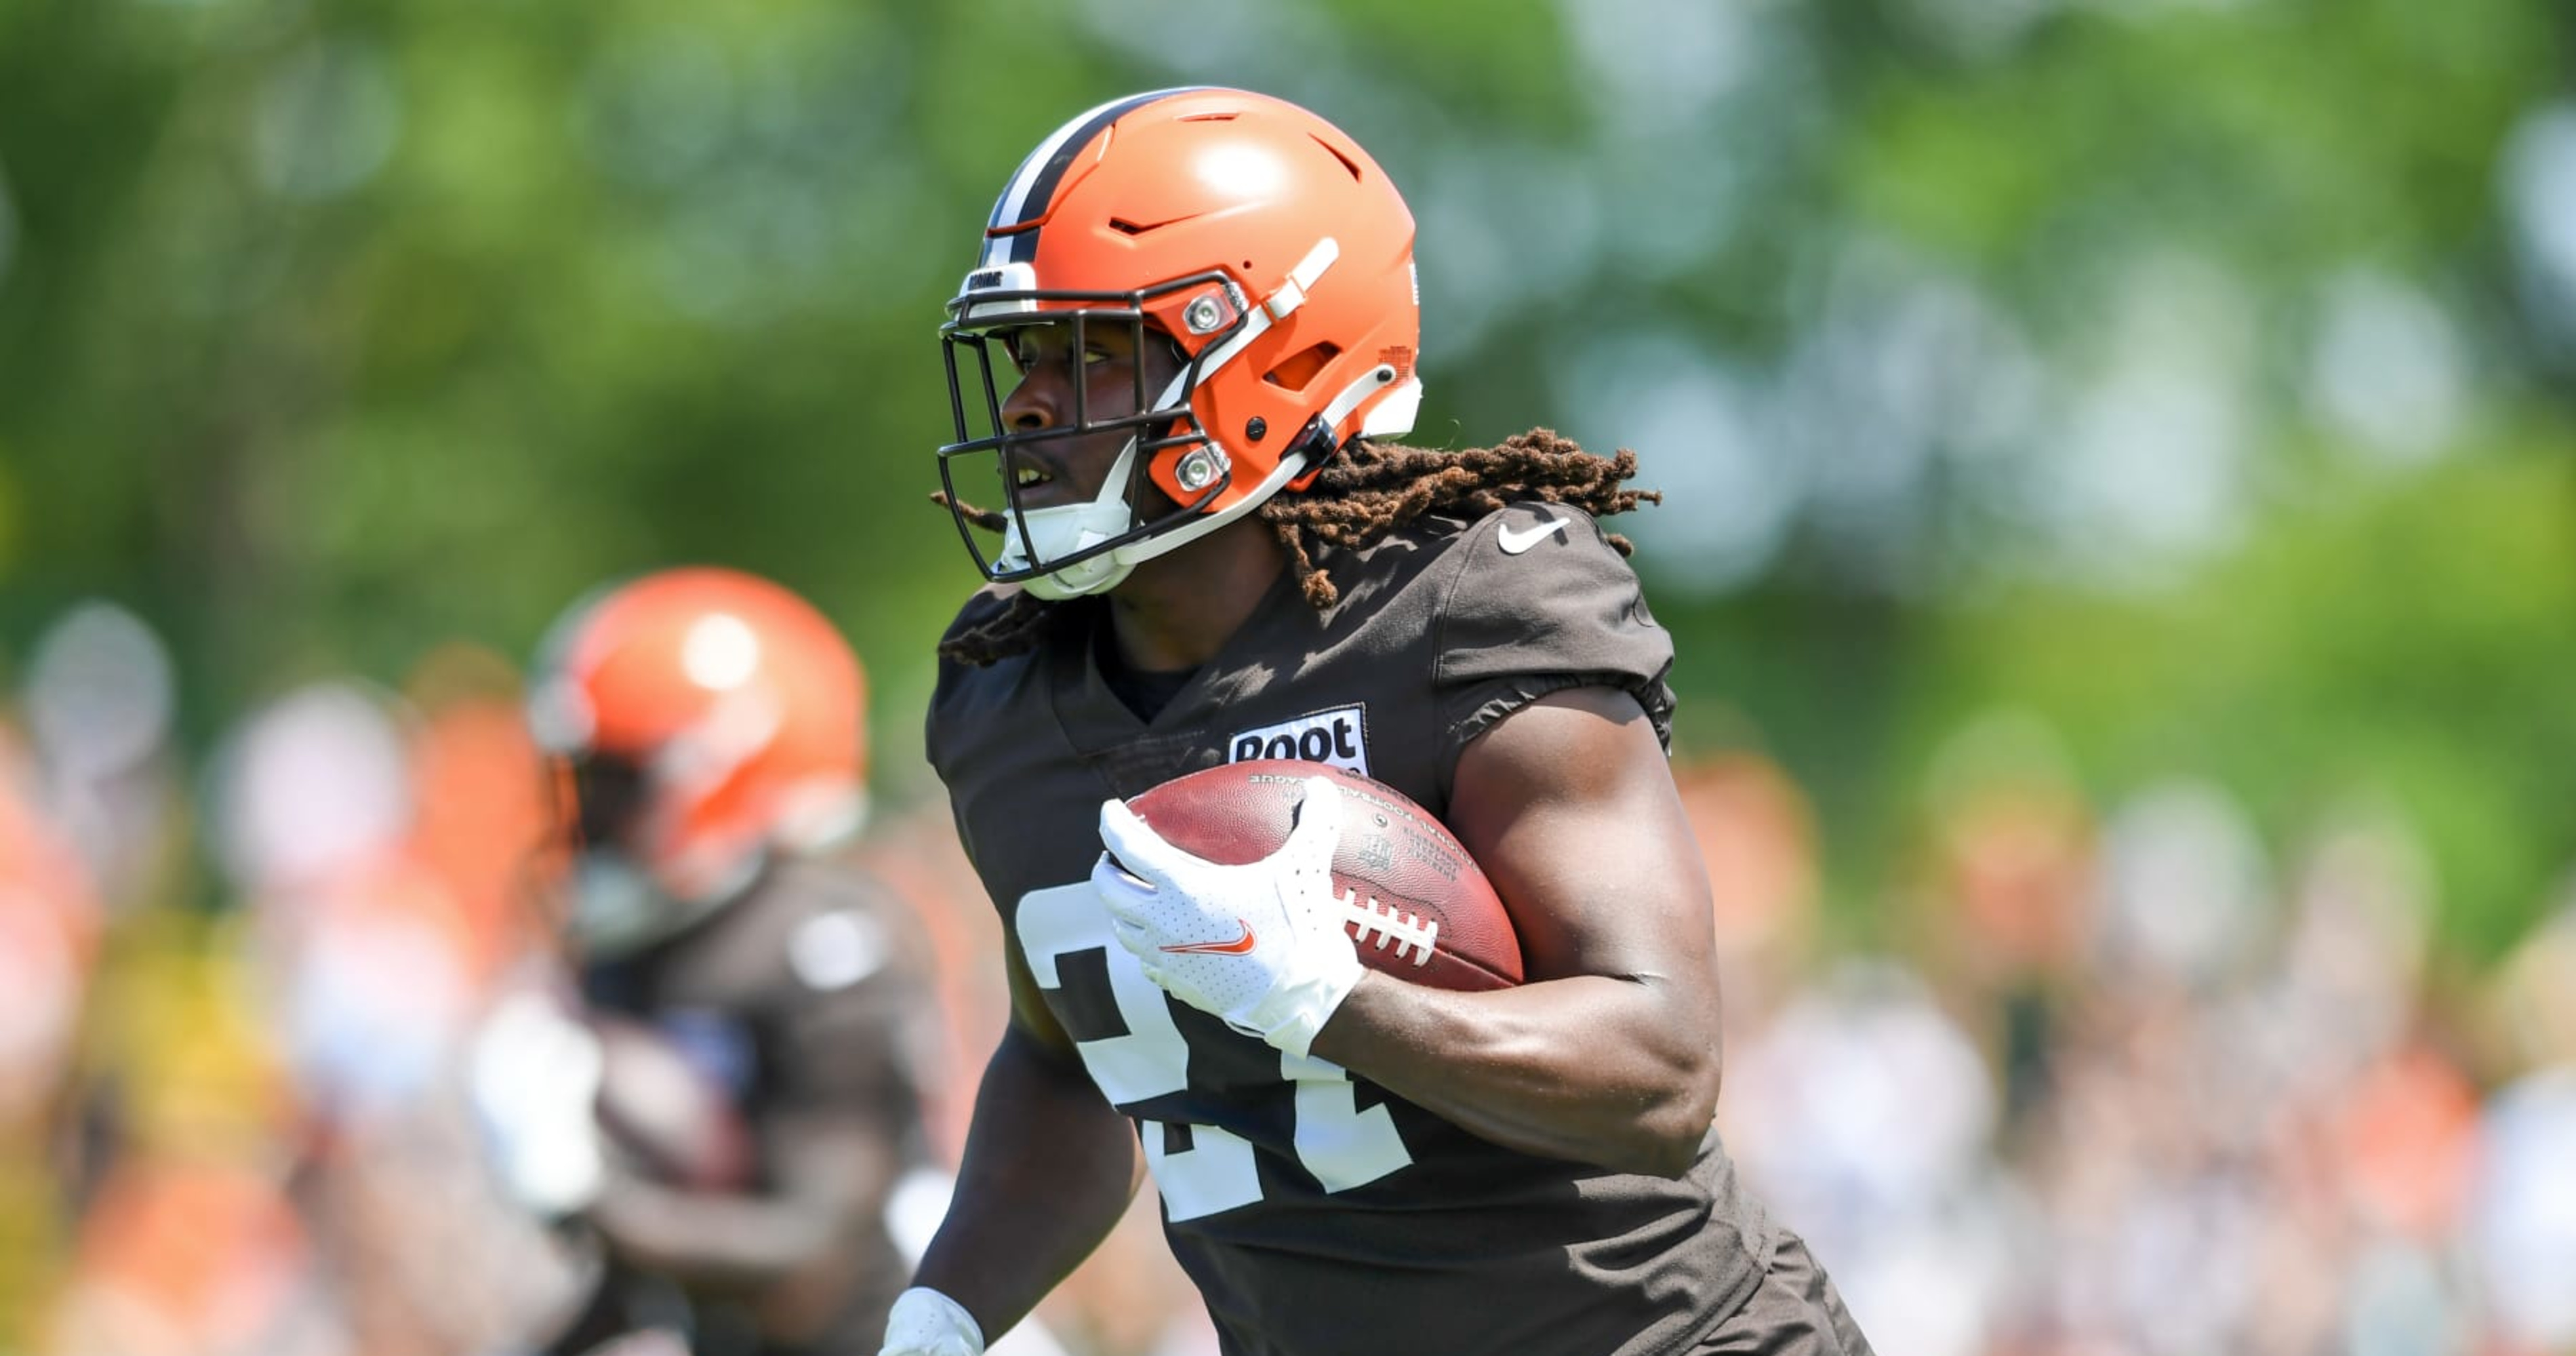 NFL Rumors: Browns Deny Kareem Hunt's Trade Request as RB Seeks New Contract